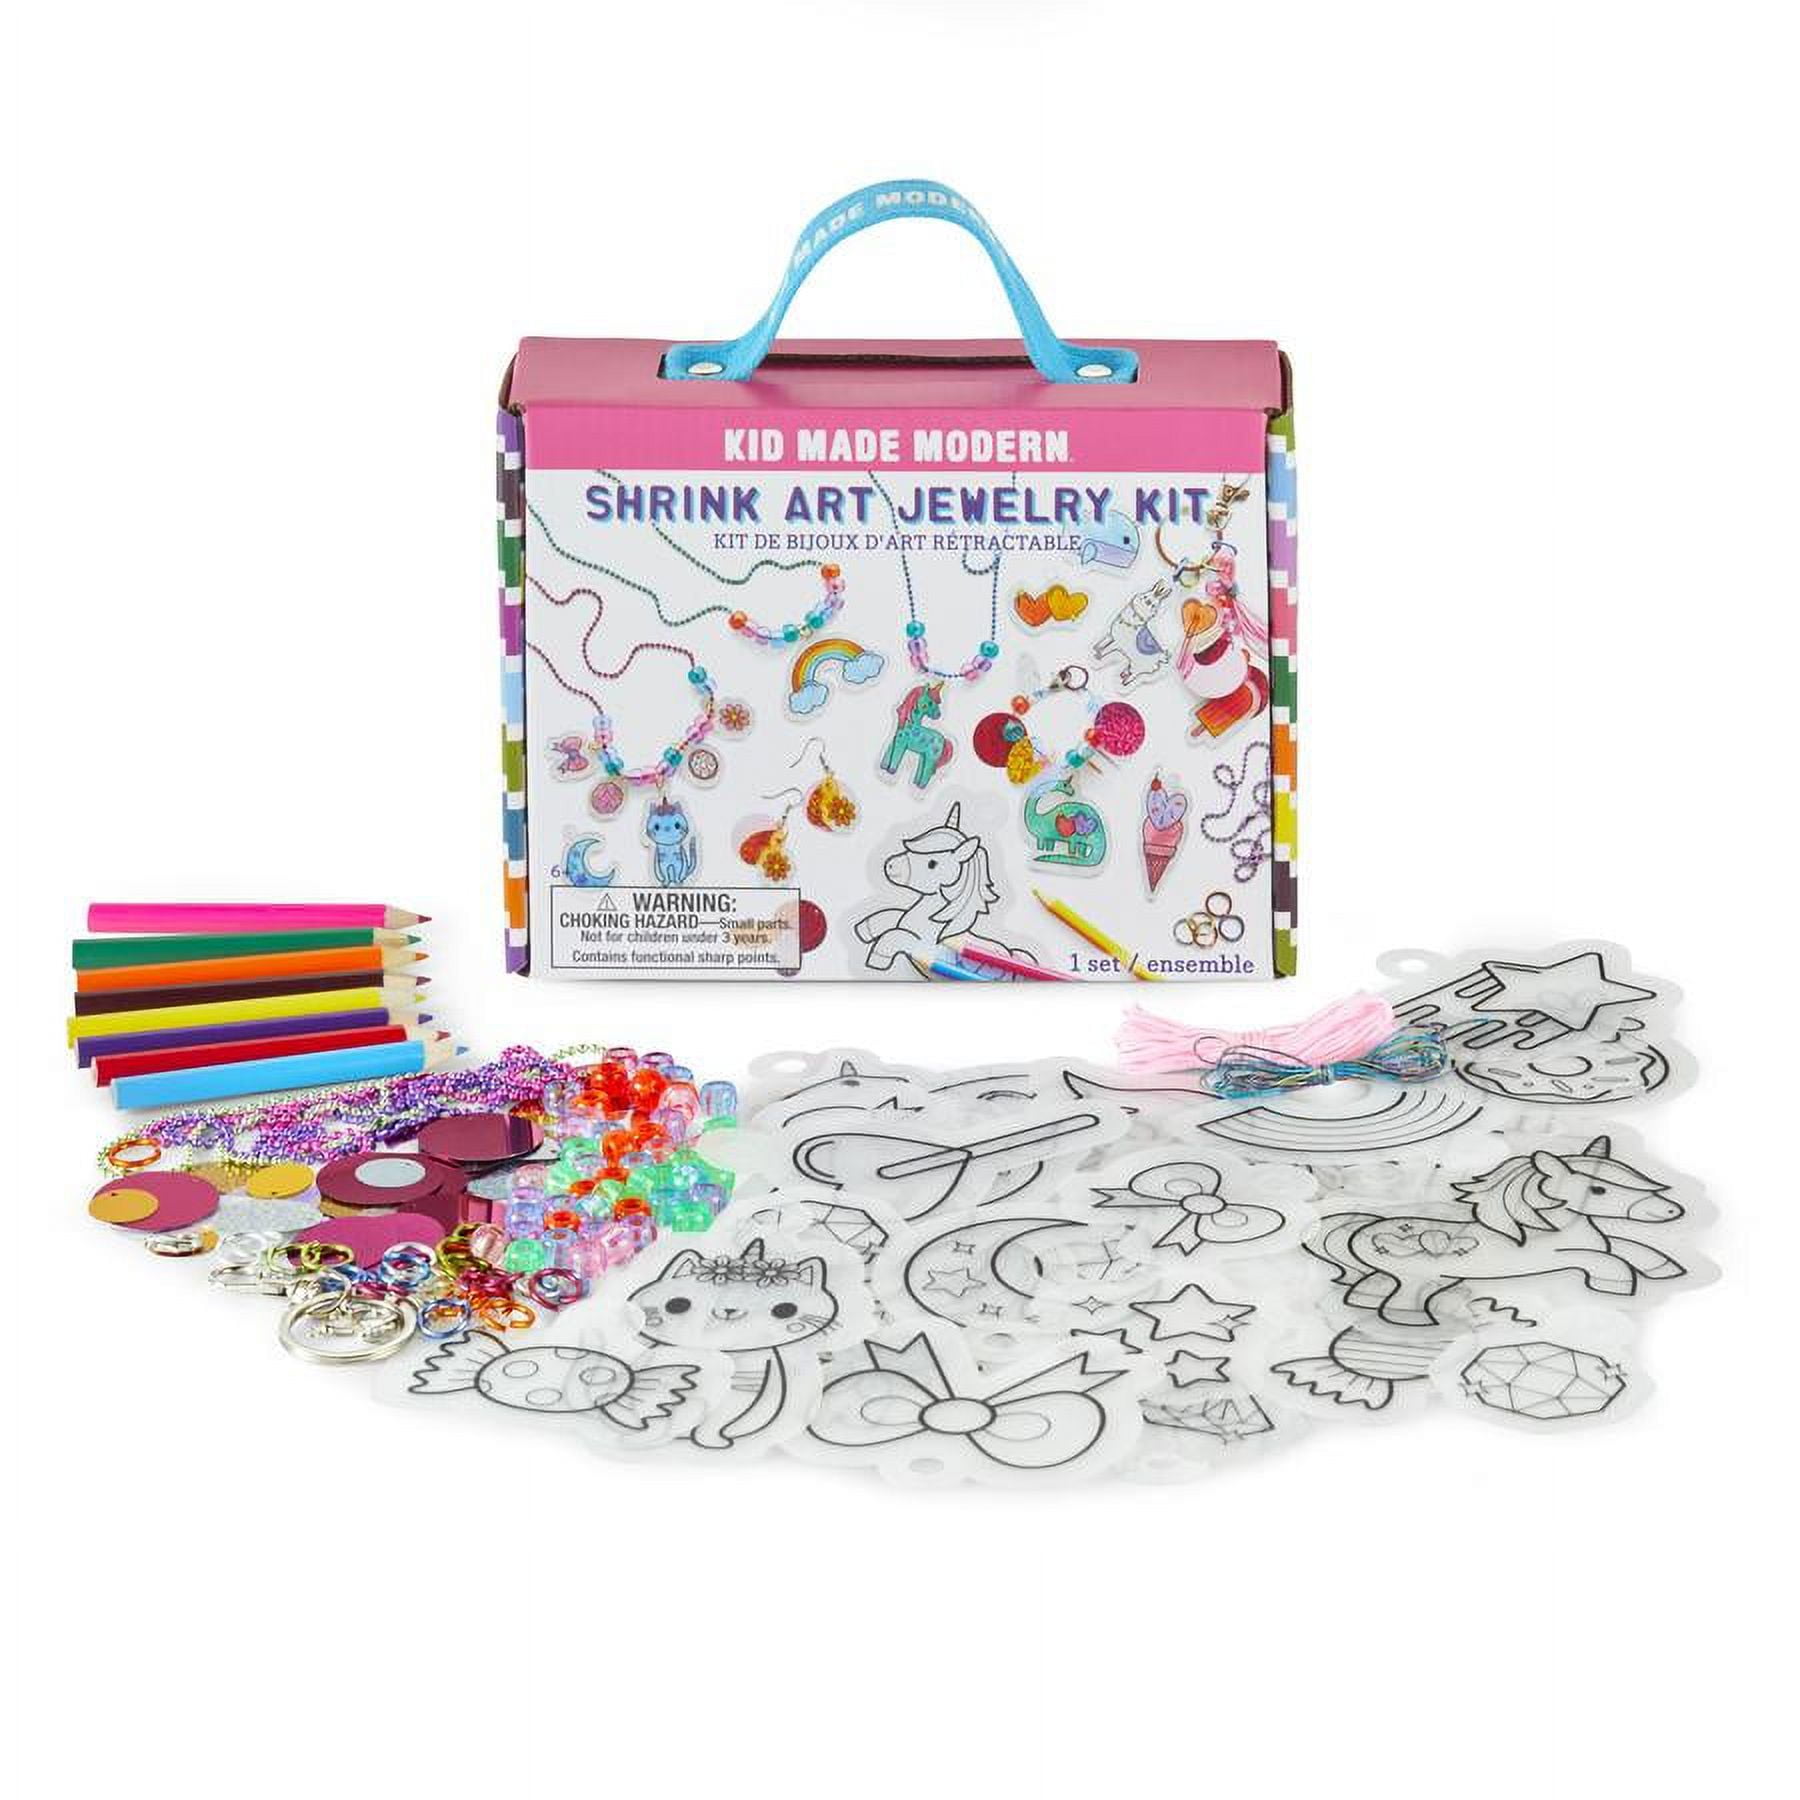 Jewelry Making Kit, 1960 PCS Jewelry Making Supplies Includes Jewelry  Beads, Instructions, Findings, Wire for Bracelet, Necklace, Earrings Making,  Great Gift for Adults 